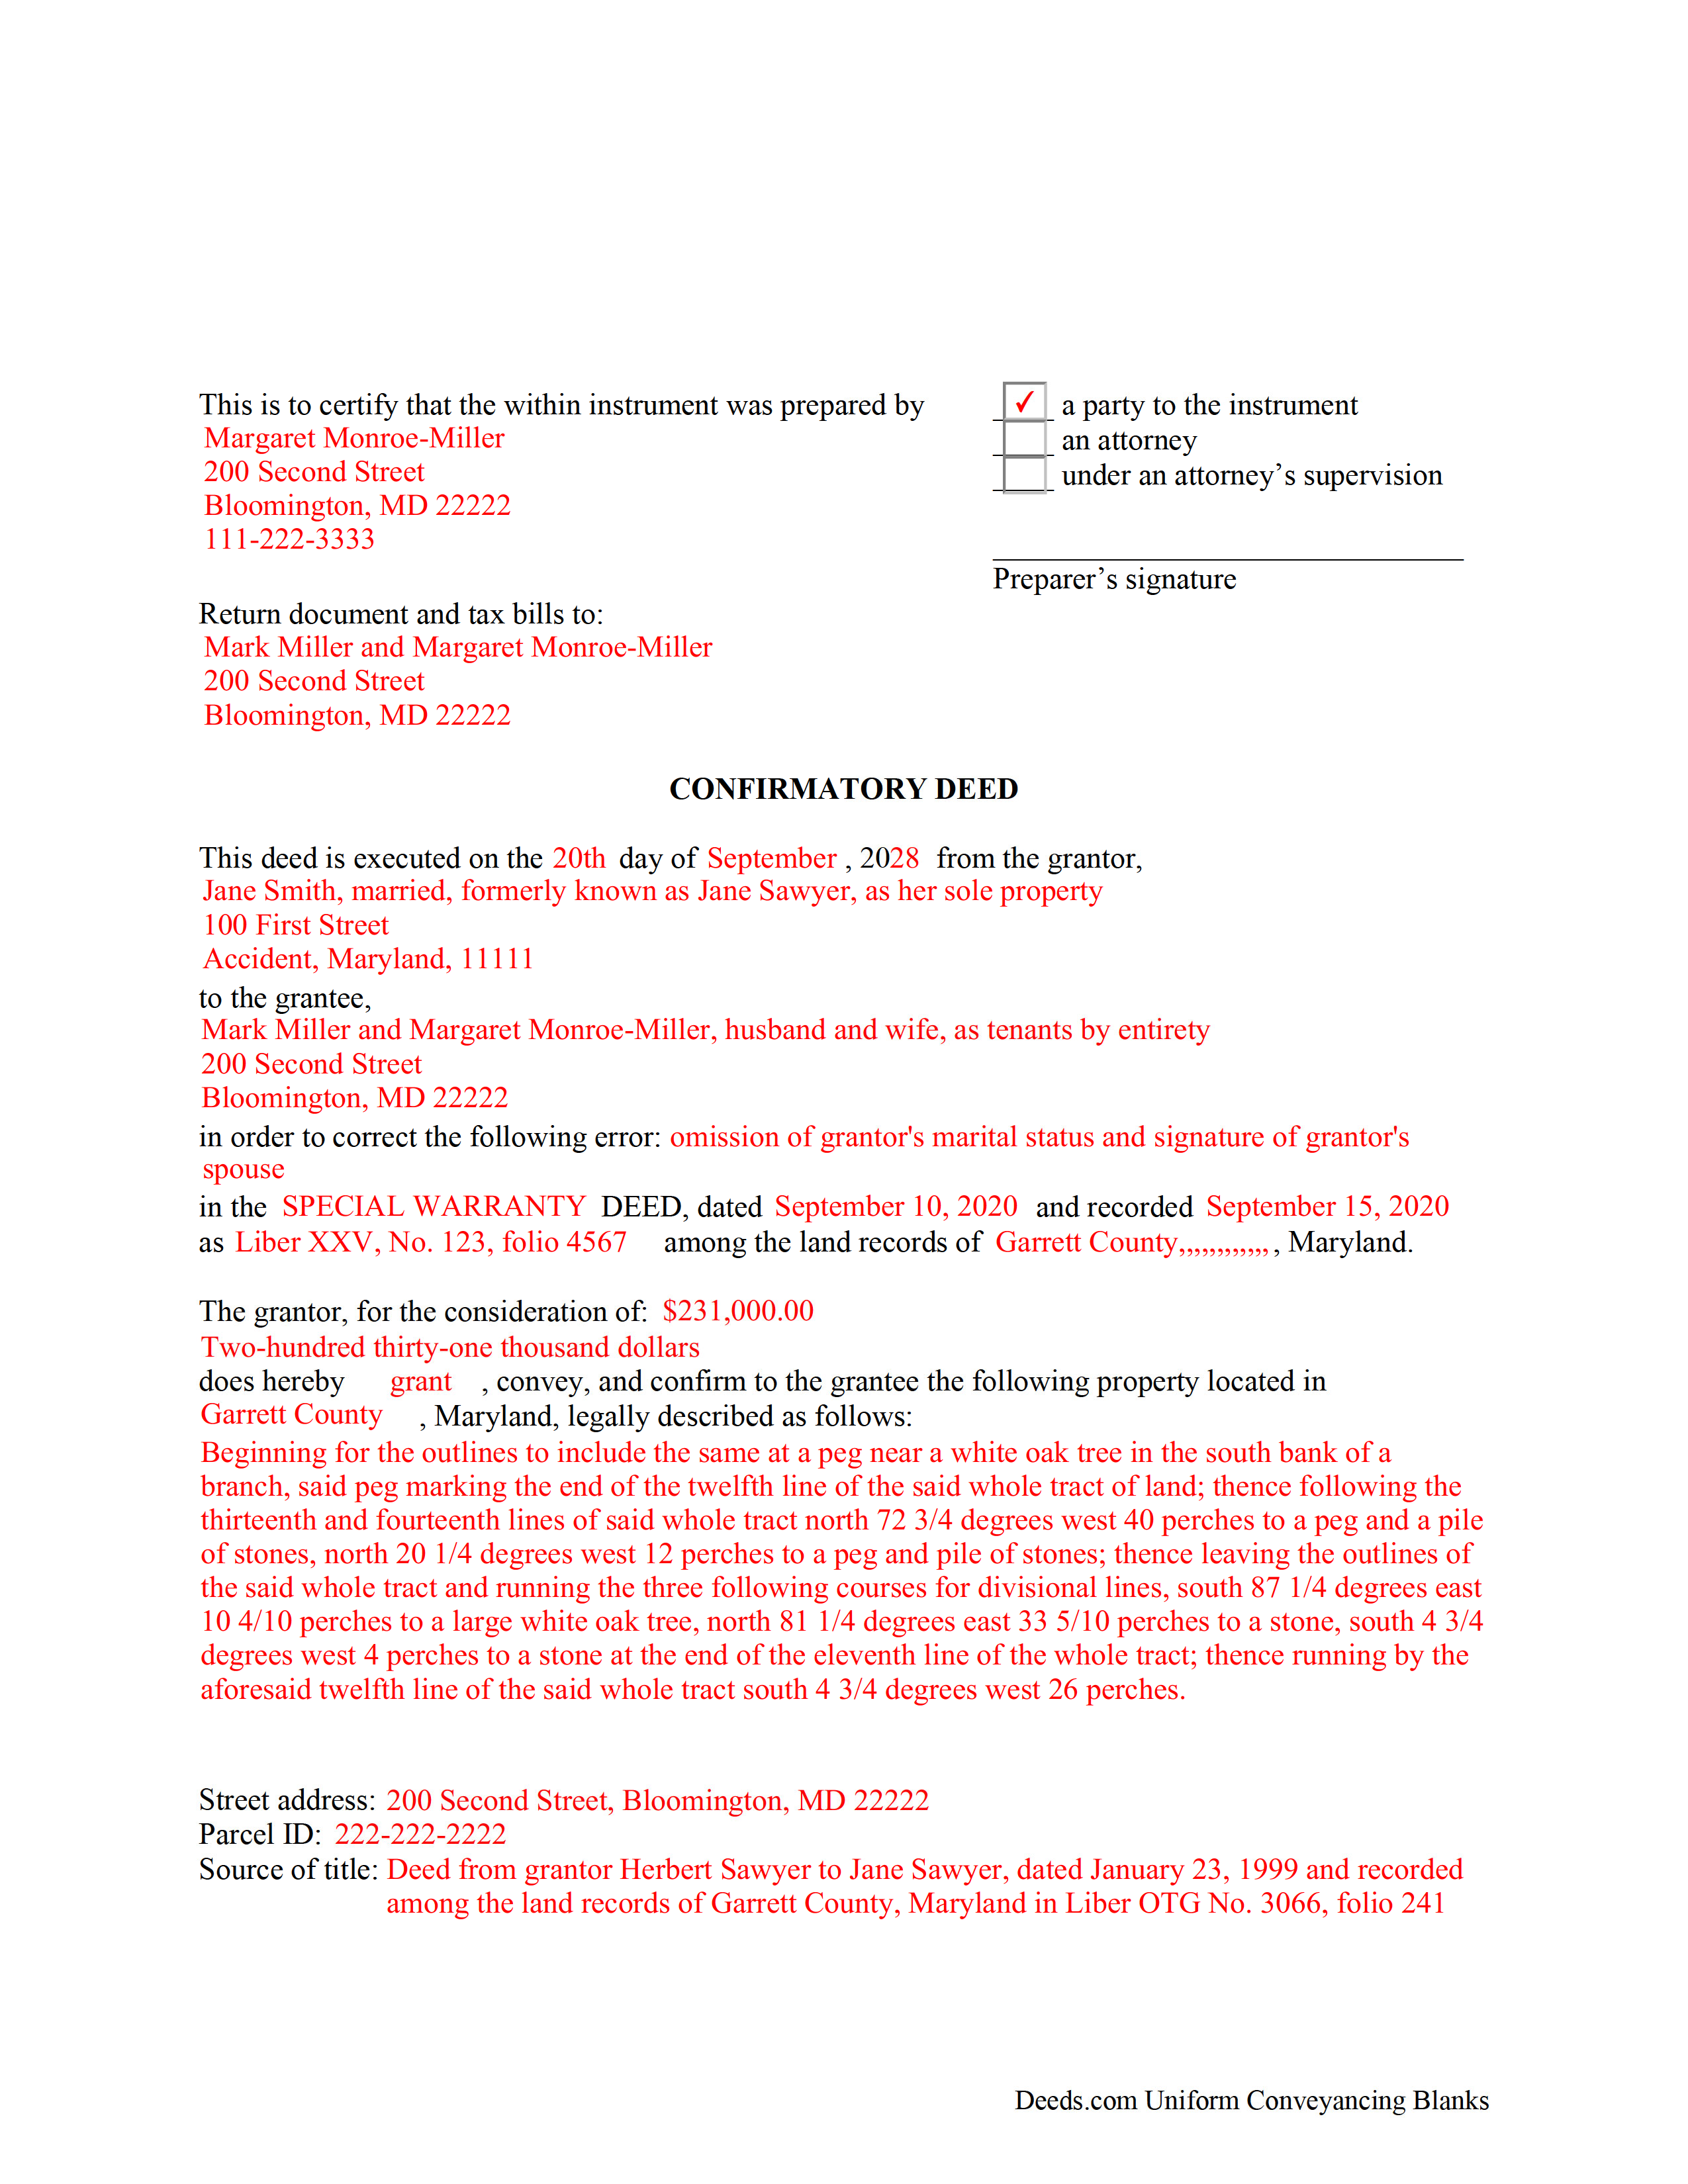 Completed Example of the Correction Deed Document